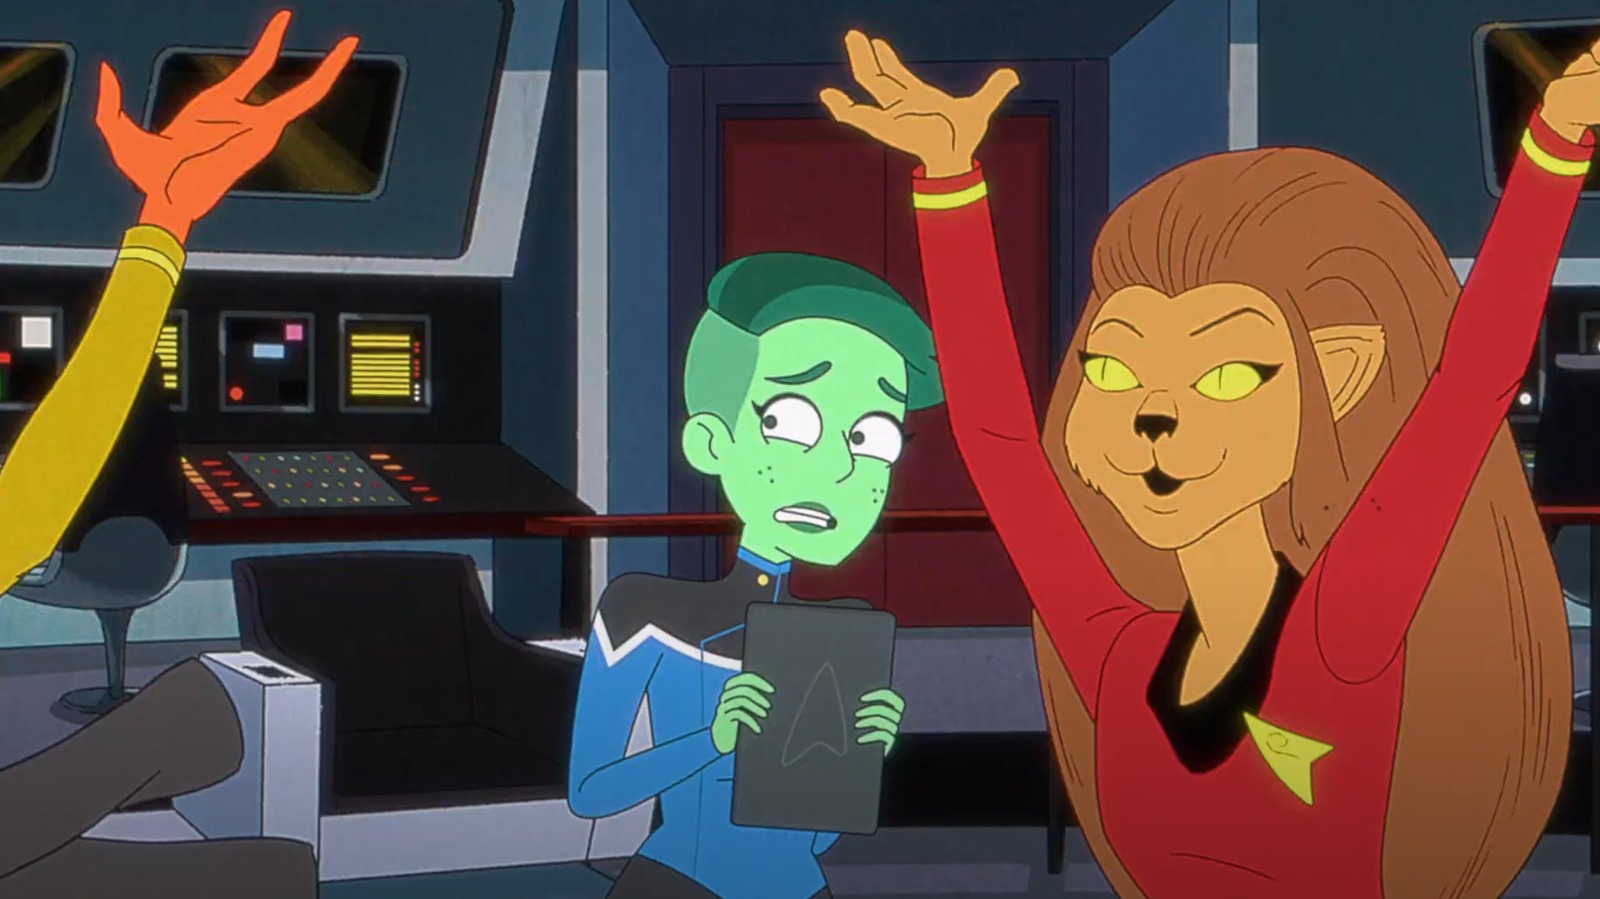 Star Trek: The Animated Series is returning with new shorts featuring  Riker, Quark, and Saru